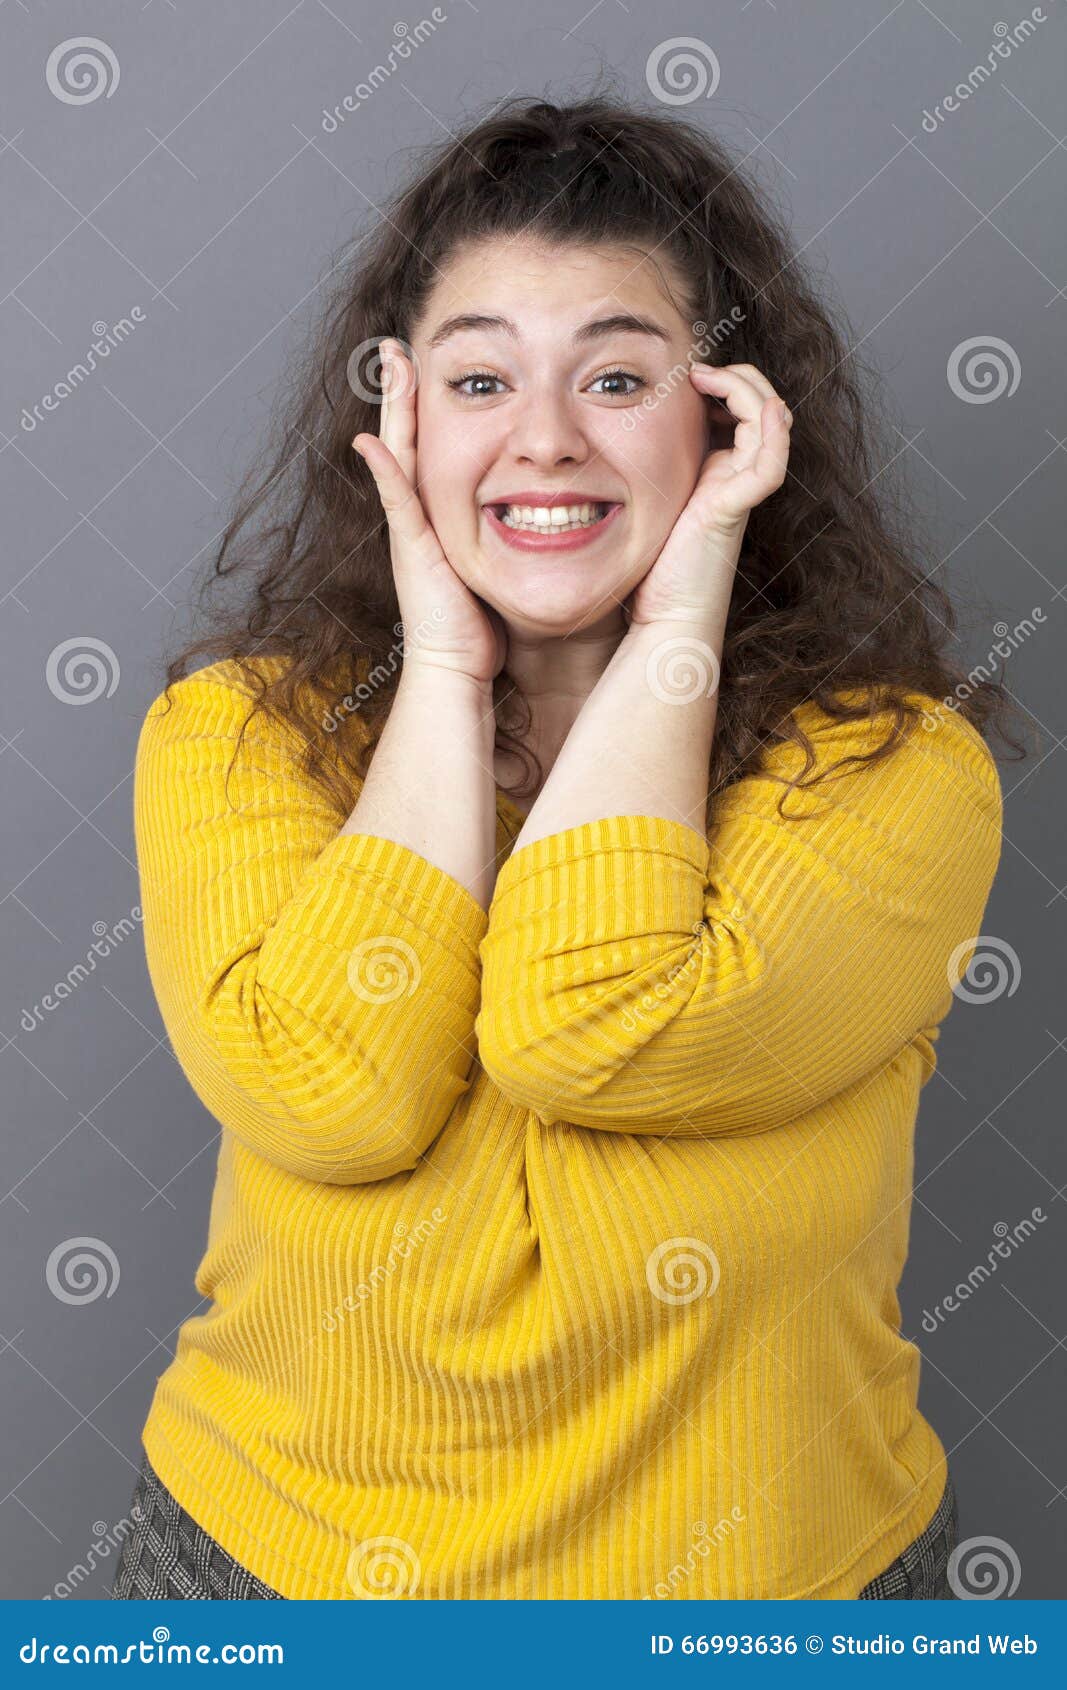 thrilled young fat woman smiling for shy seduction